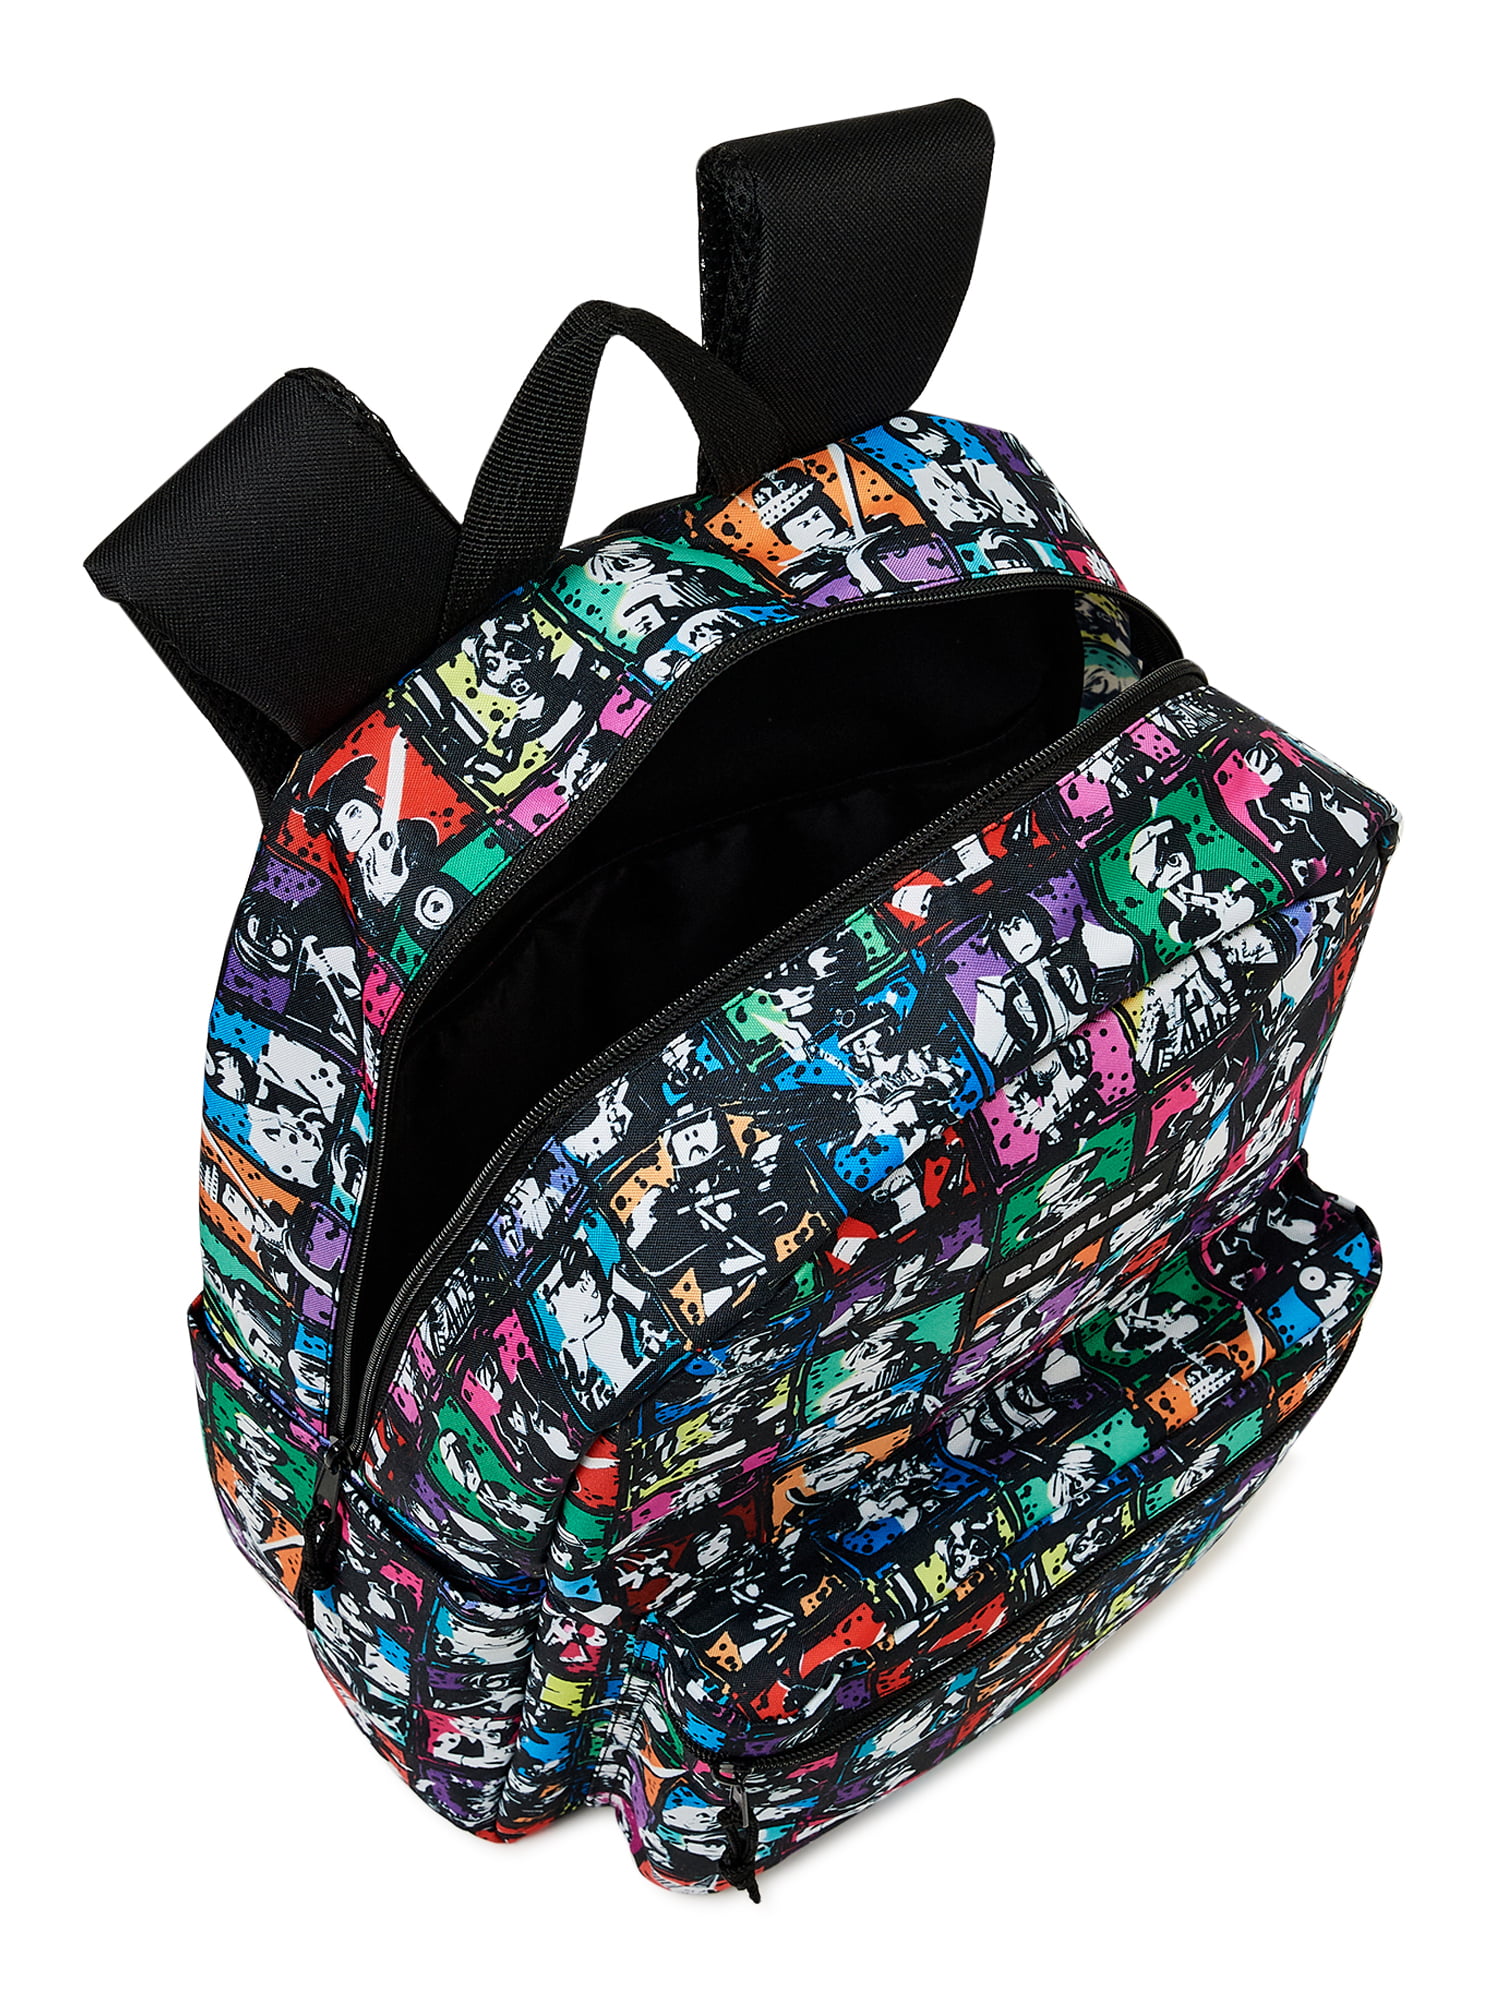 Anime Inspired 12 Inch Roblox Backpack For Kids Five Nights At Freddys  Design, Ideal For School, Daily Use, And Childrens Book Storage 201204 From  Landong, $29.05